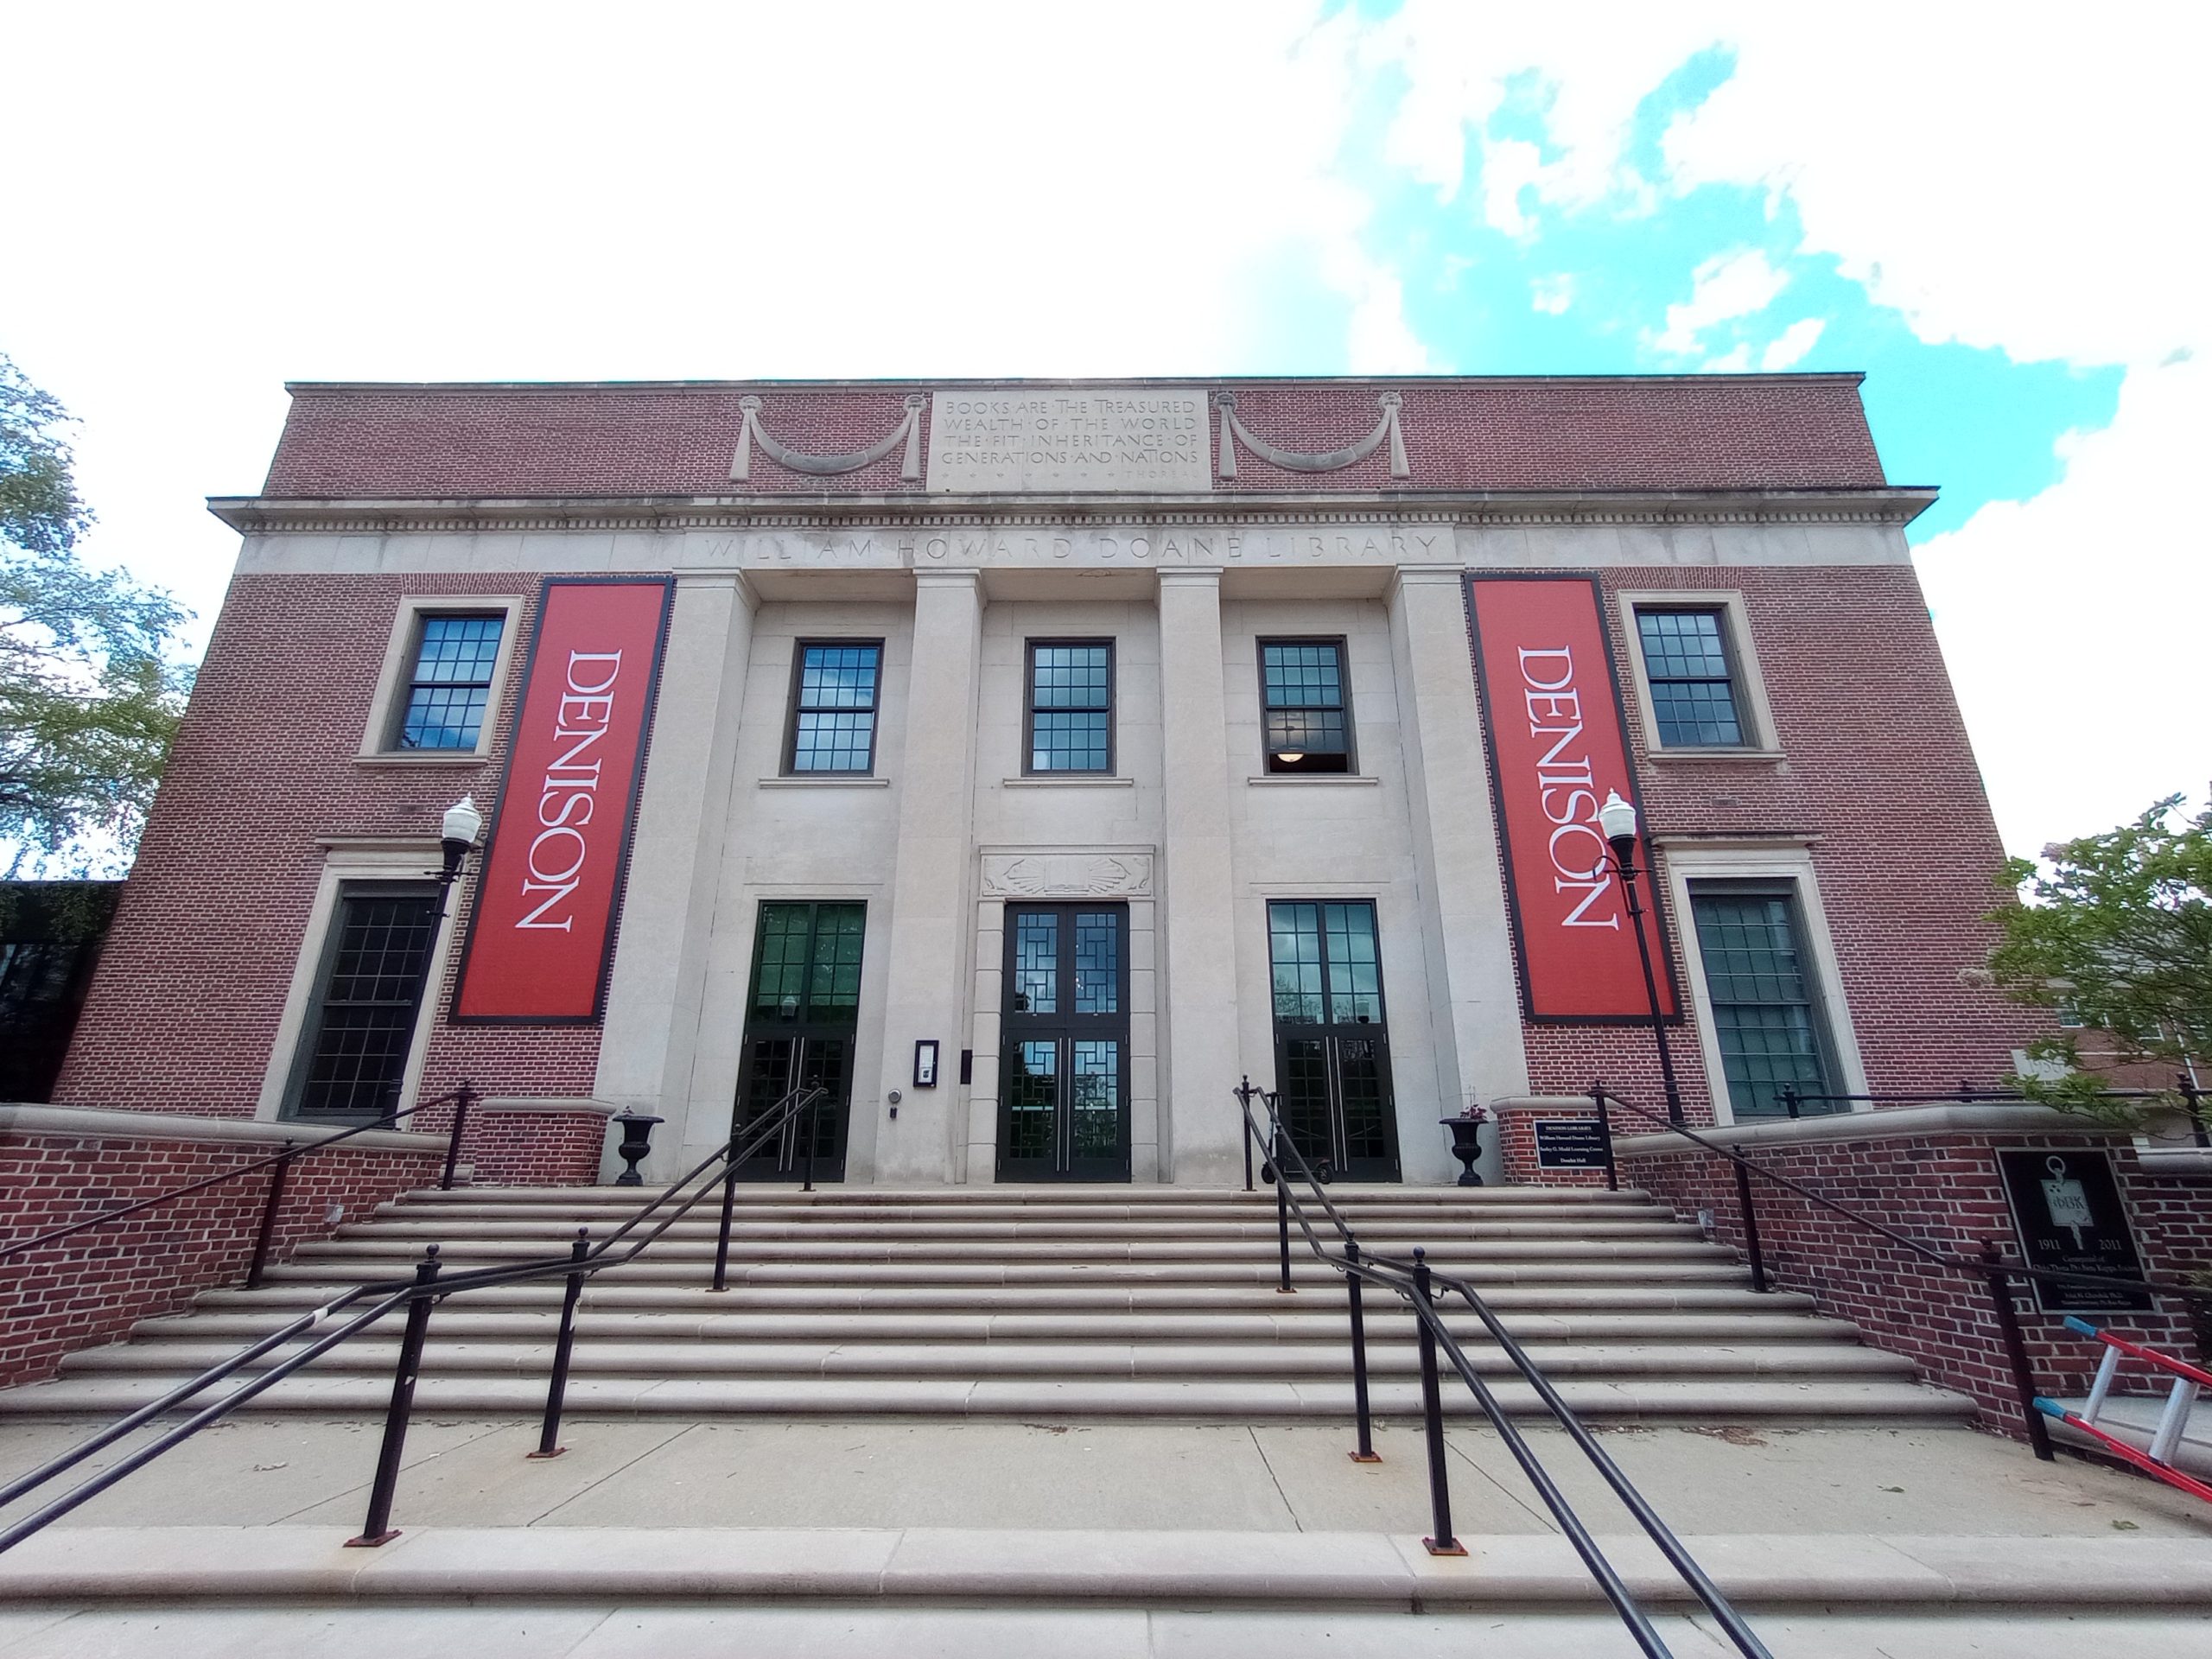 Denison University Installed 2 Lind SignSpring BannerFrame Classic banners with covers on their Library